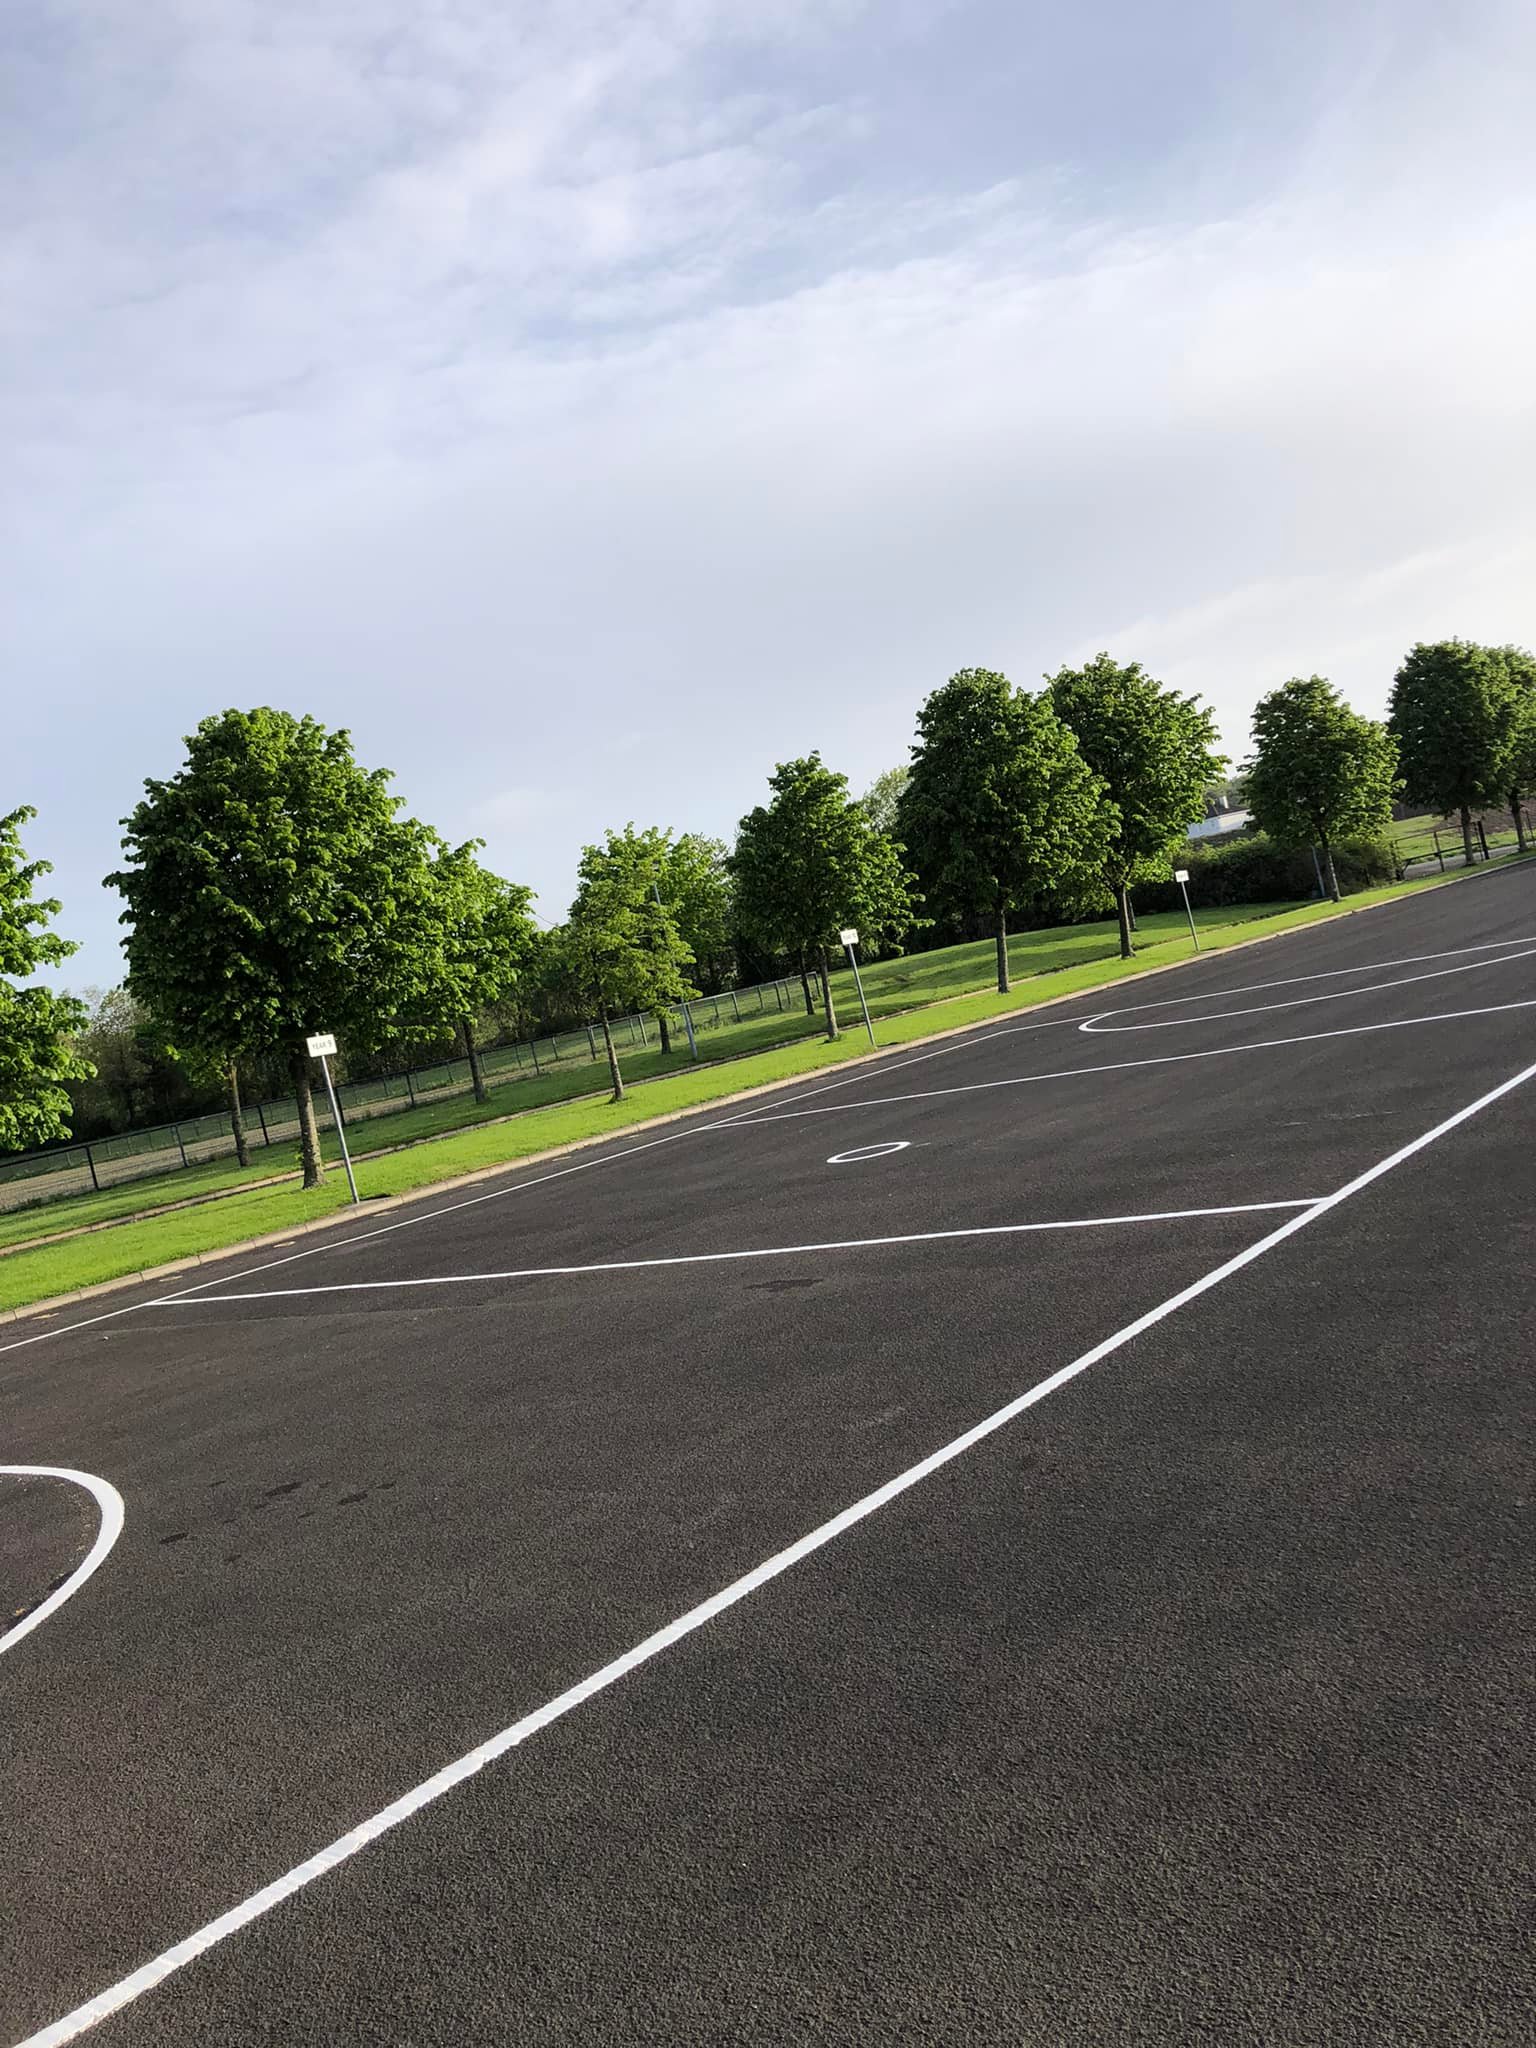 Tennis courts, rounders, and netball courts for thornhill school in derry